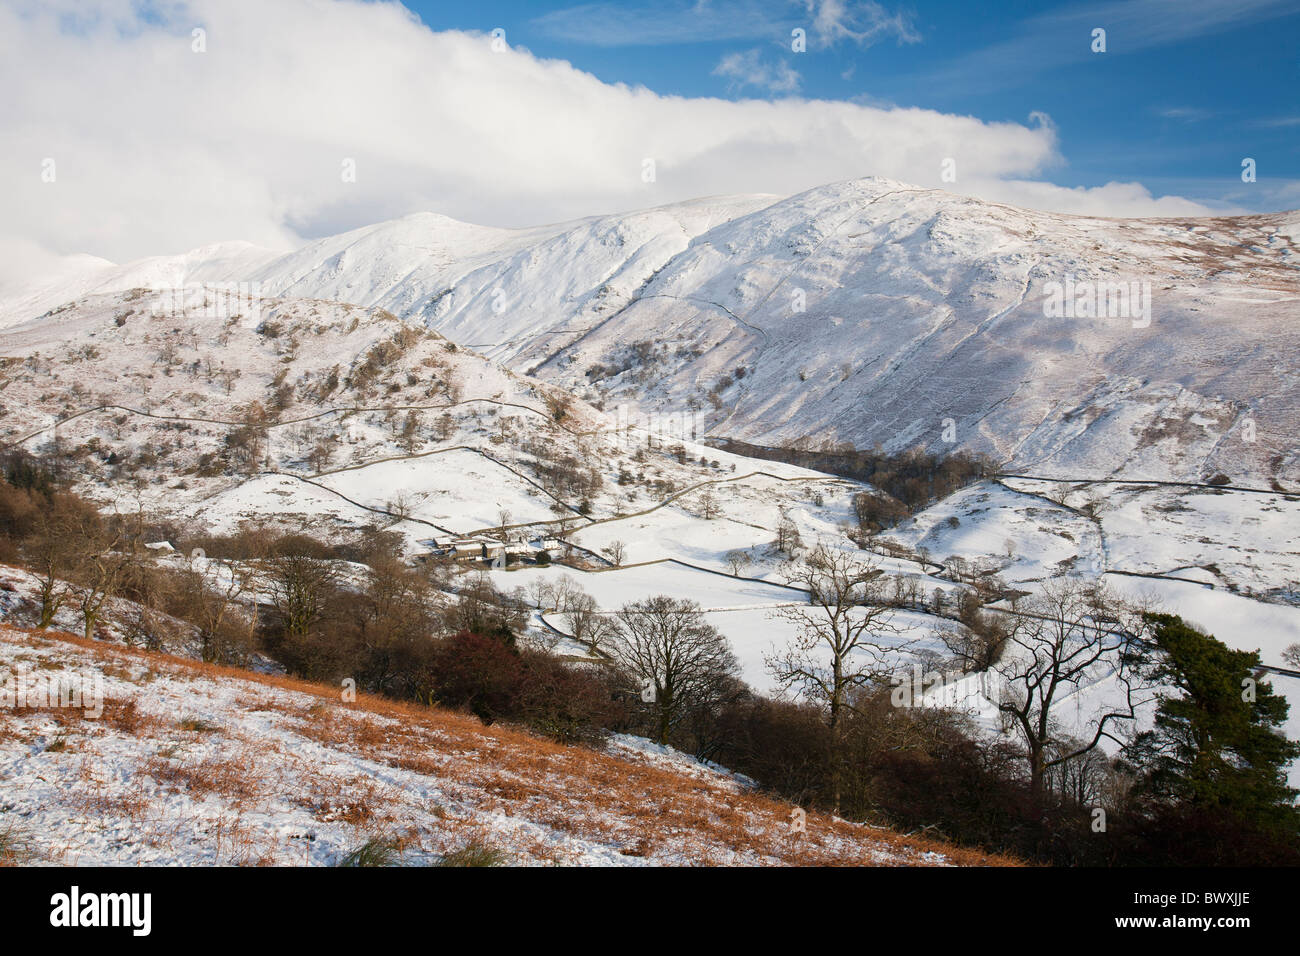 The Troutbeck Valley and Kentmere fells in the Lake District, UK. Stock Photo